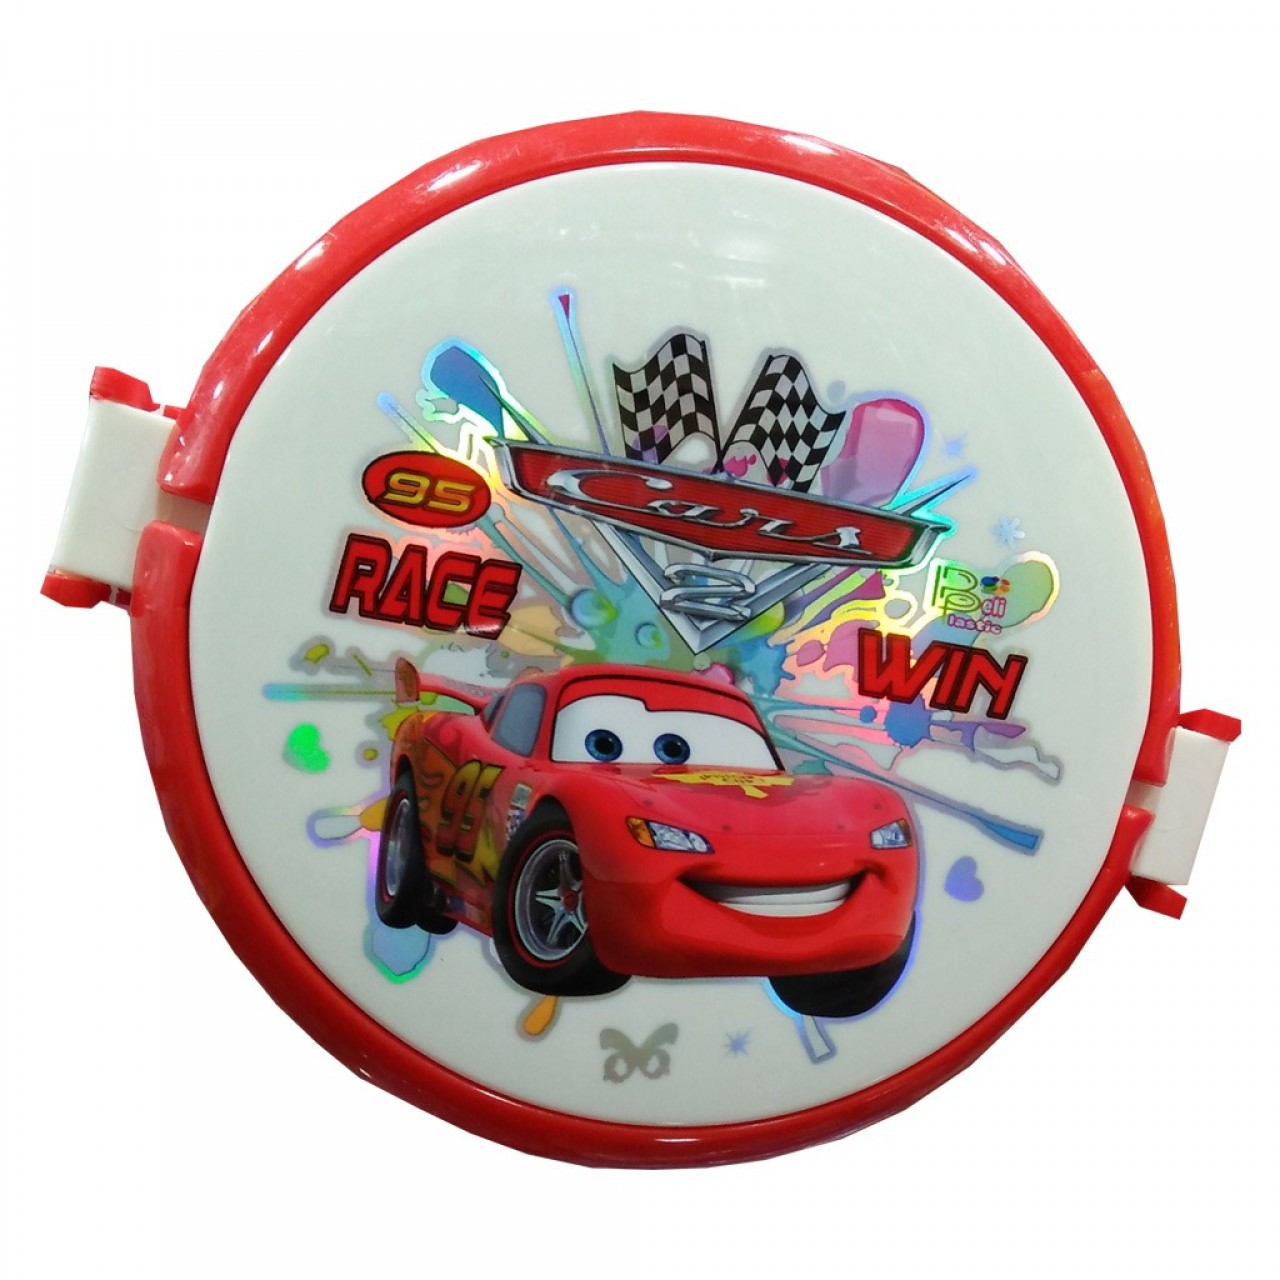 Car Racer Themed lunch box For Kids - Blue & Red